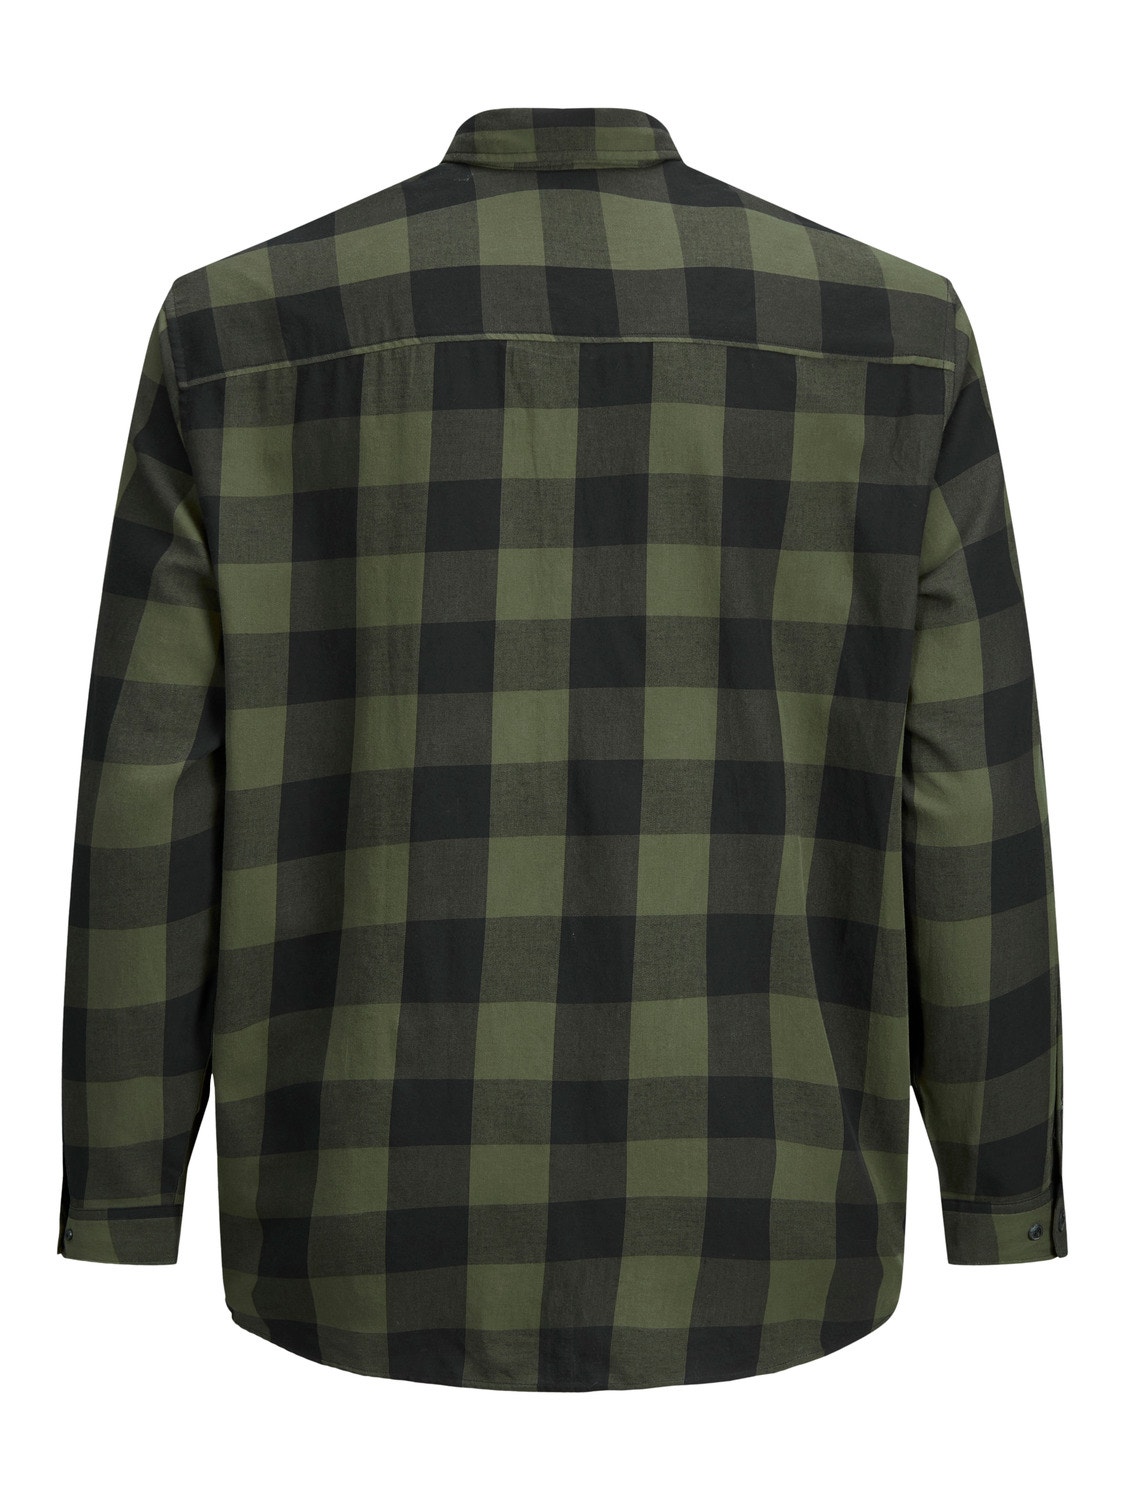 Jack & Jones Plus Loose Fit Checked shirt -Dusty Olive - 12183107